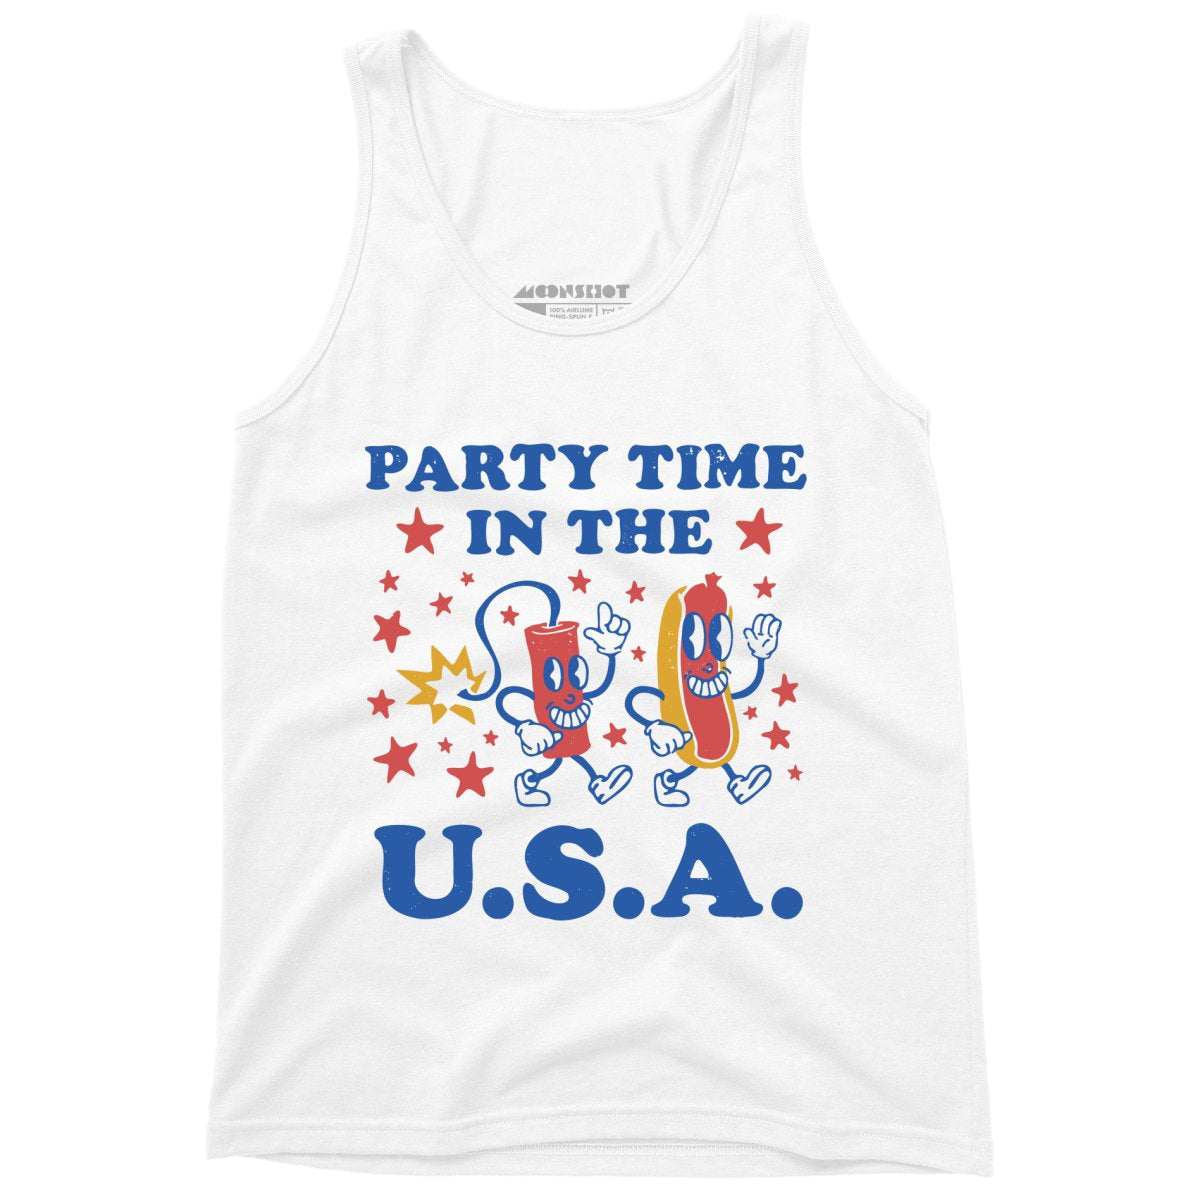 Party Time in The U.S.A. - Unisex Tank Top